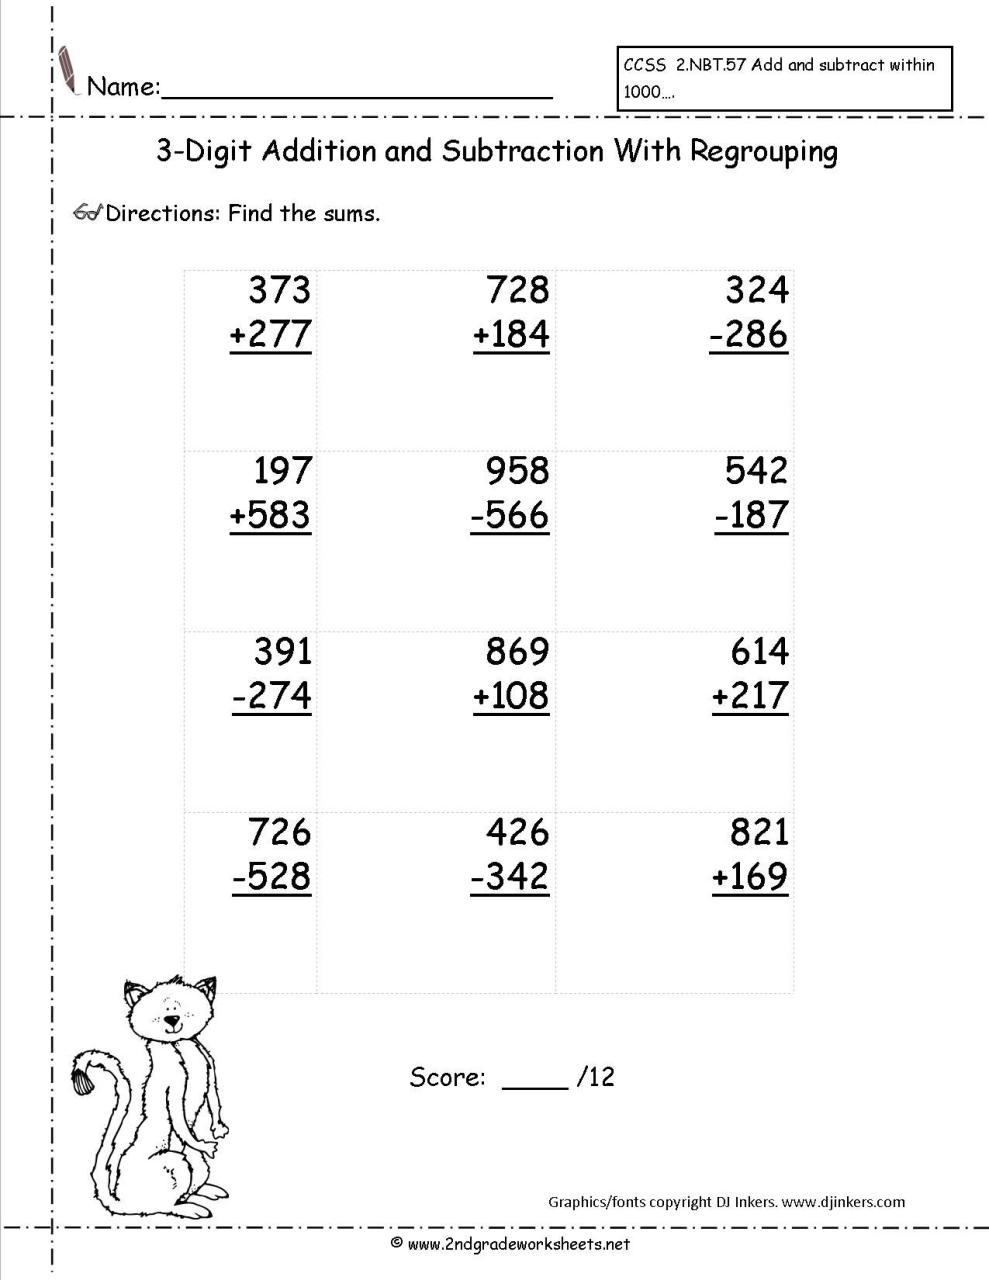 2Nd Grade Math Worksheets 3 Digit Subtraction With Regrouping